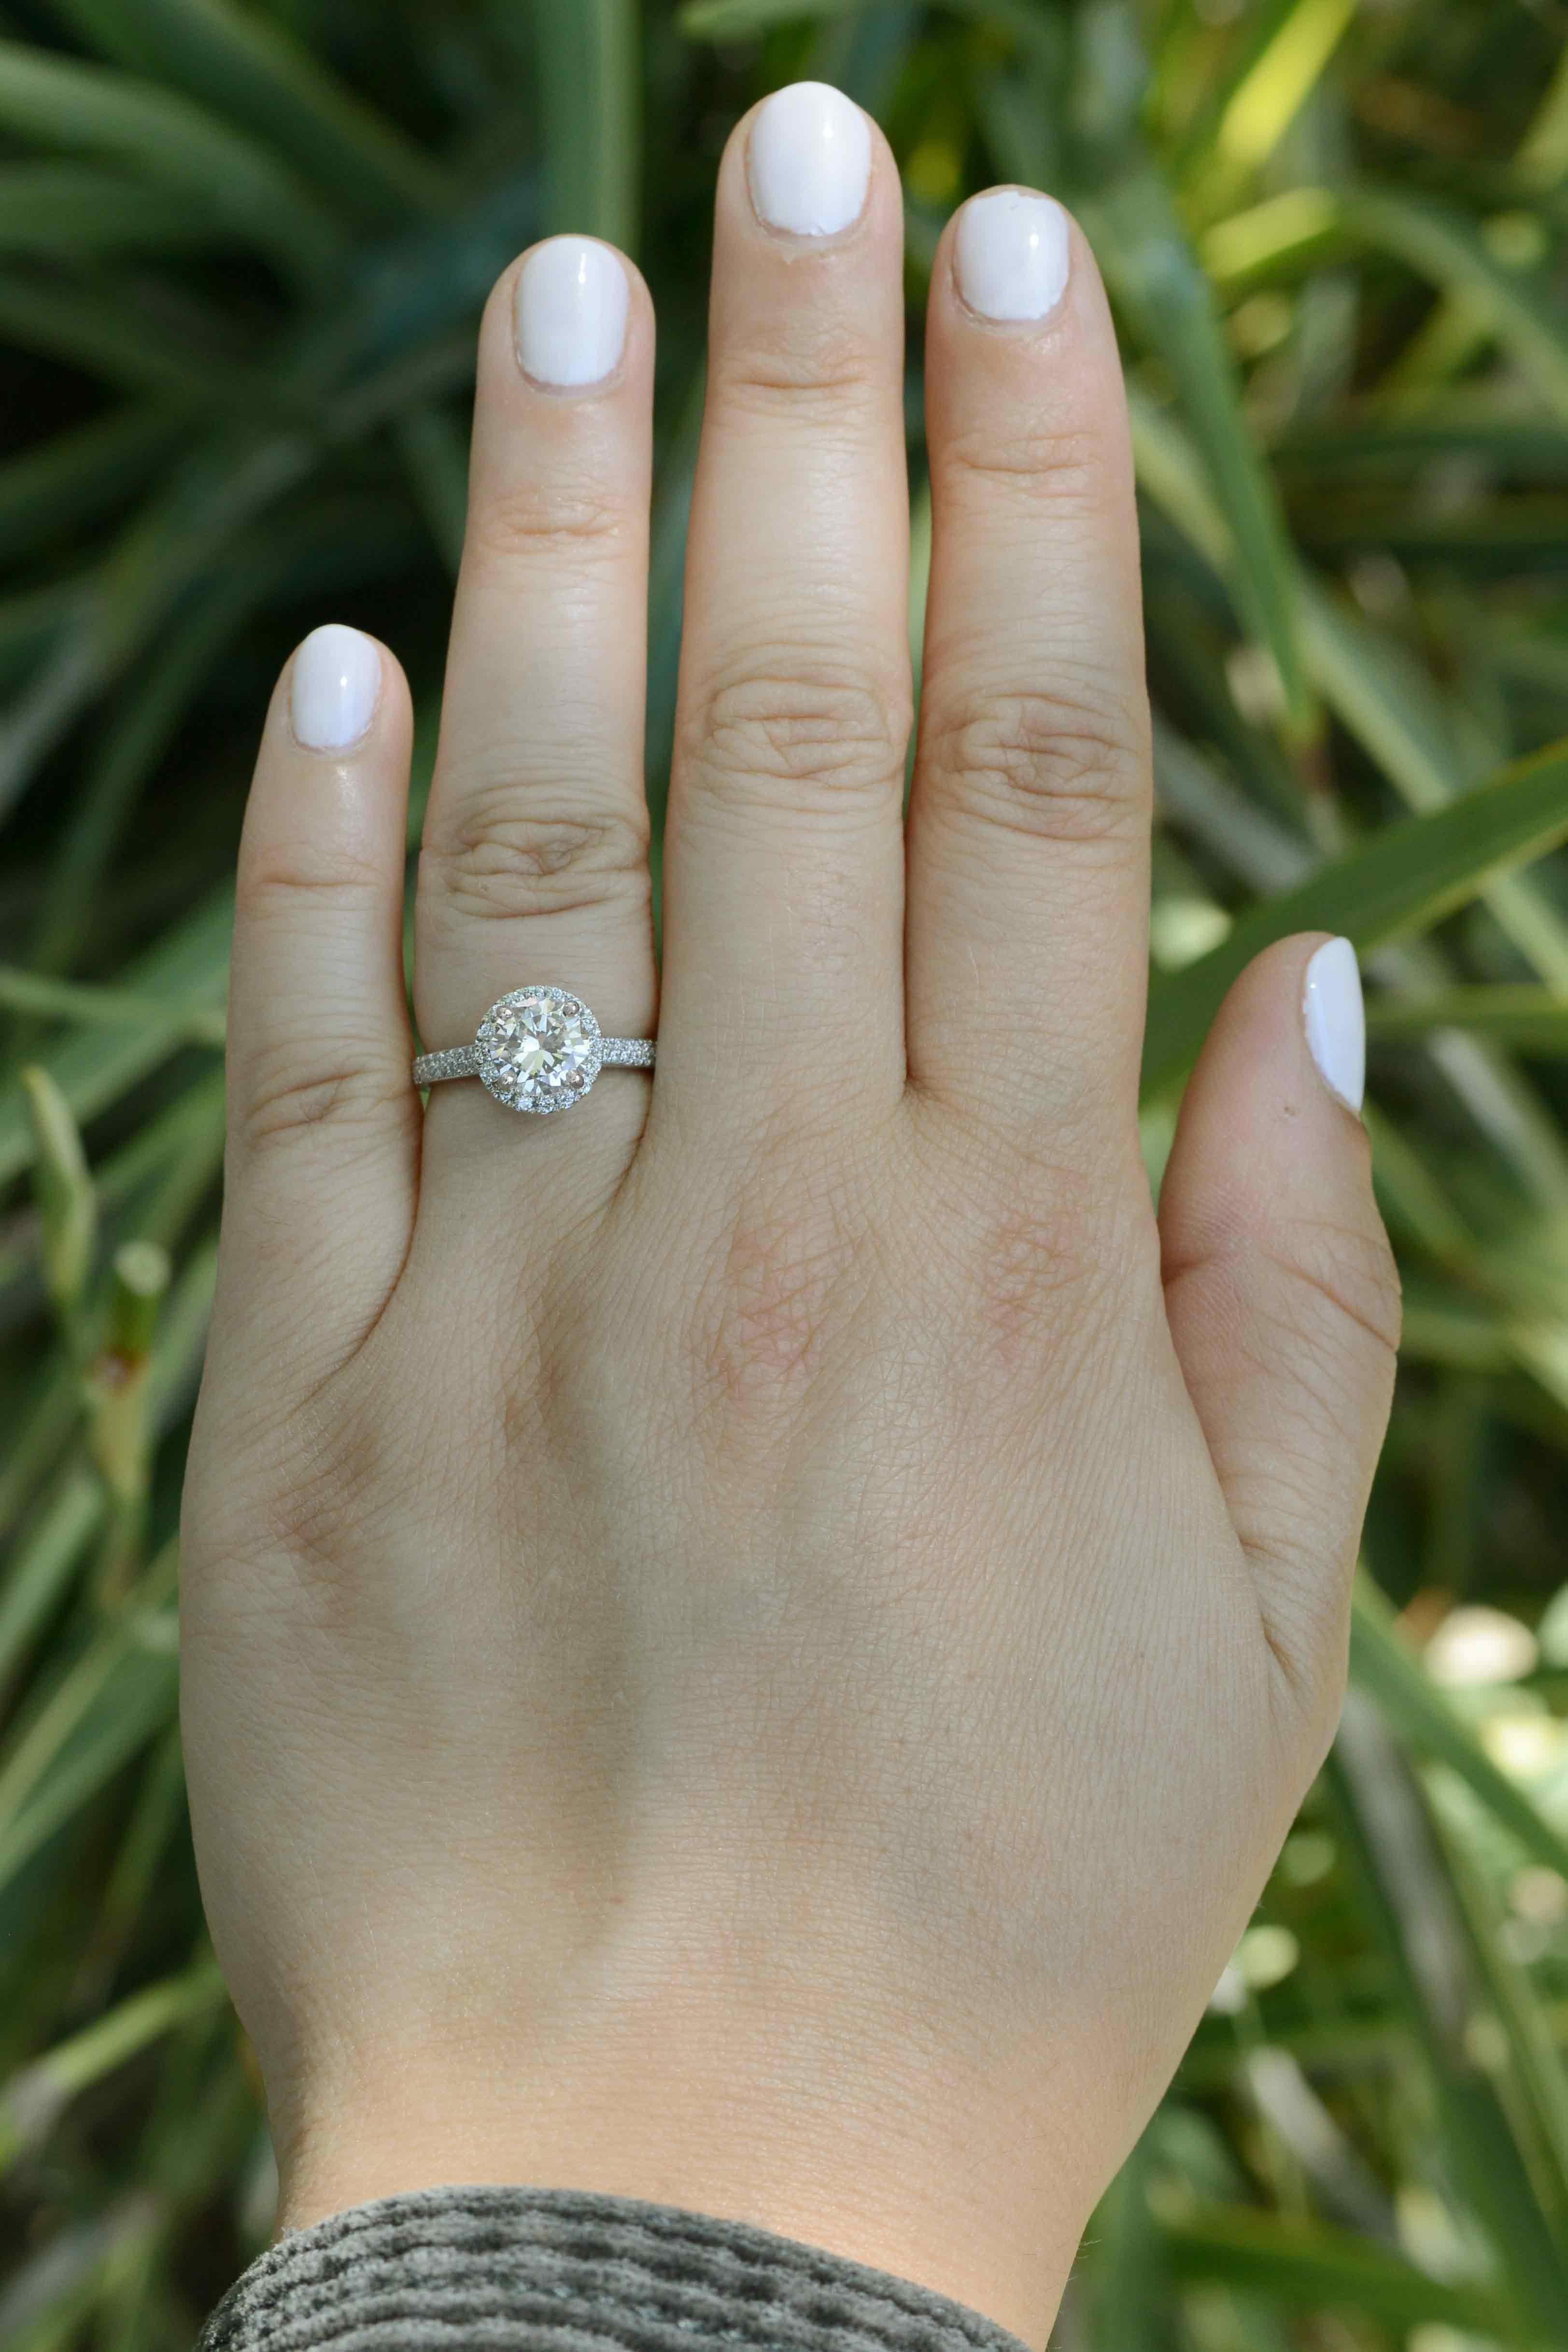 The Criscarre diamond halo solitaire engagement ring is a true classic. Centering on a 1.41 carat GIA certified round brilliant cut diamond, that captivates a dazzling, near colorless (J) sparkle and brilliance. Boasting nearly 2 carats total, the